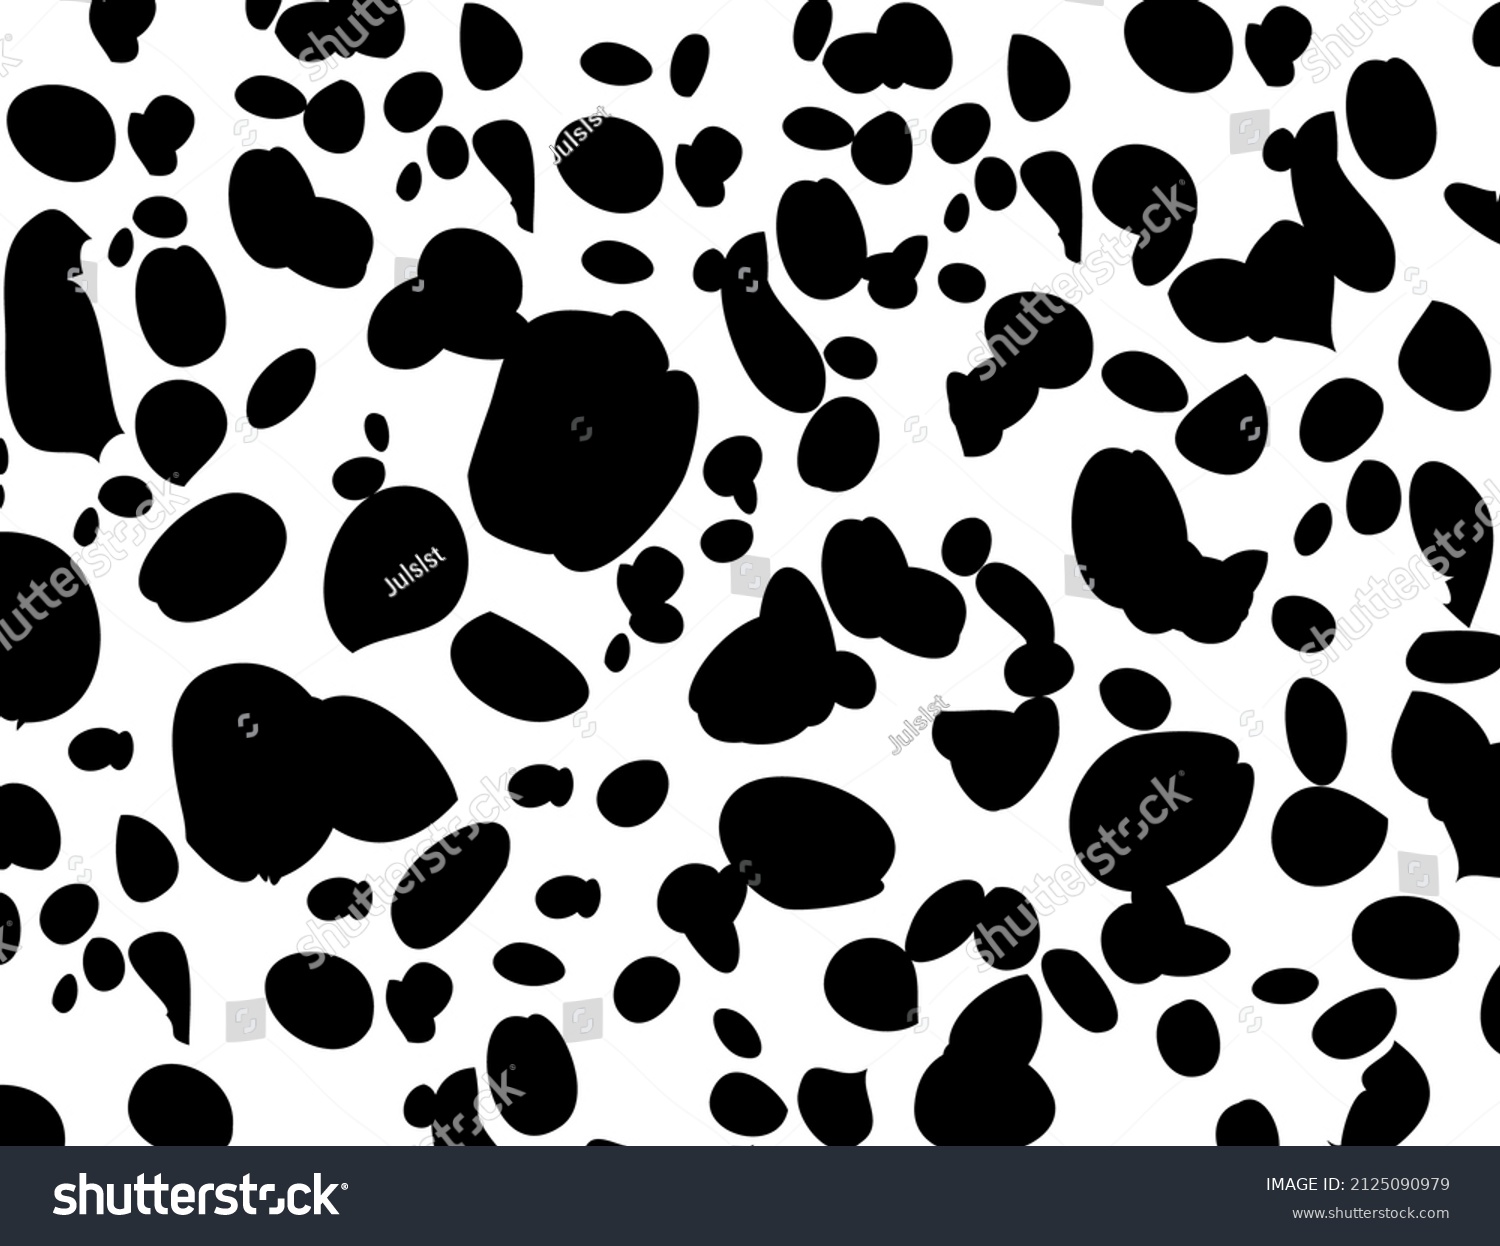 SVG of Dalmatian pattern Cow texture Animal skin template Spot background Vector design illustration Random bovine spots Farm animal textural banner Black chaotic spots isolated on white svg